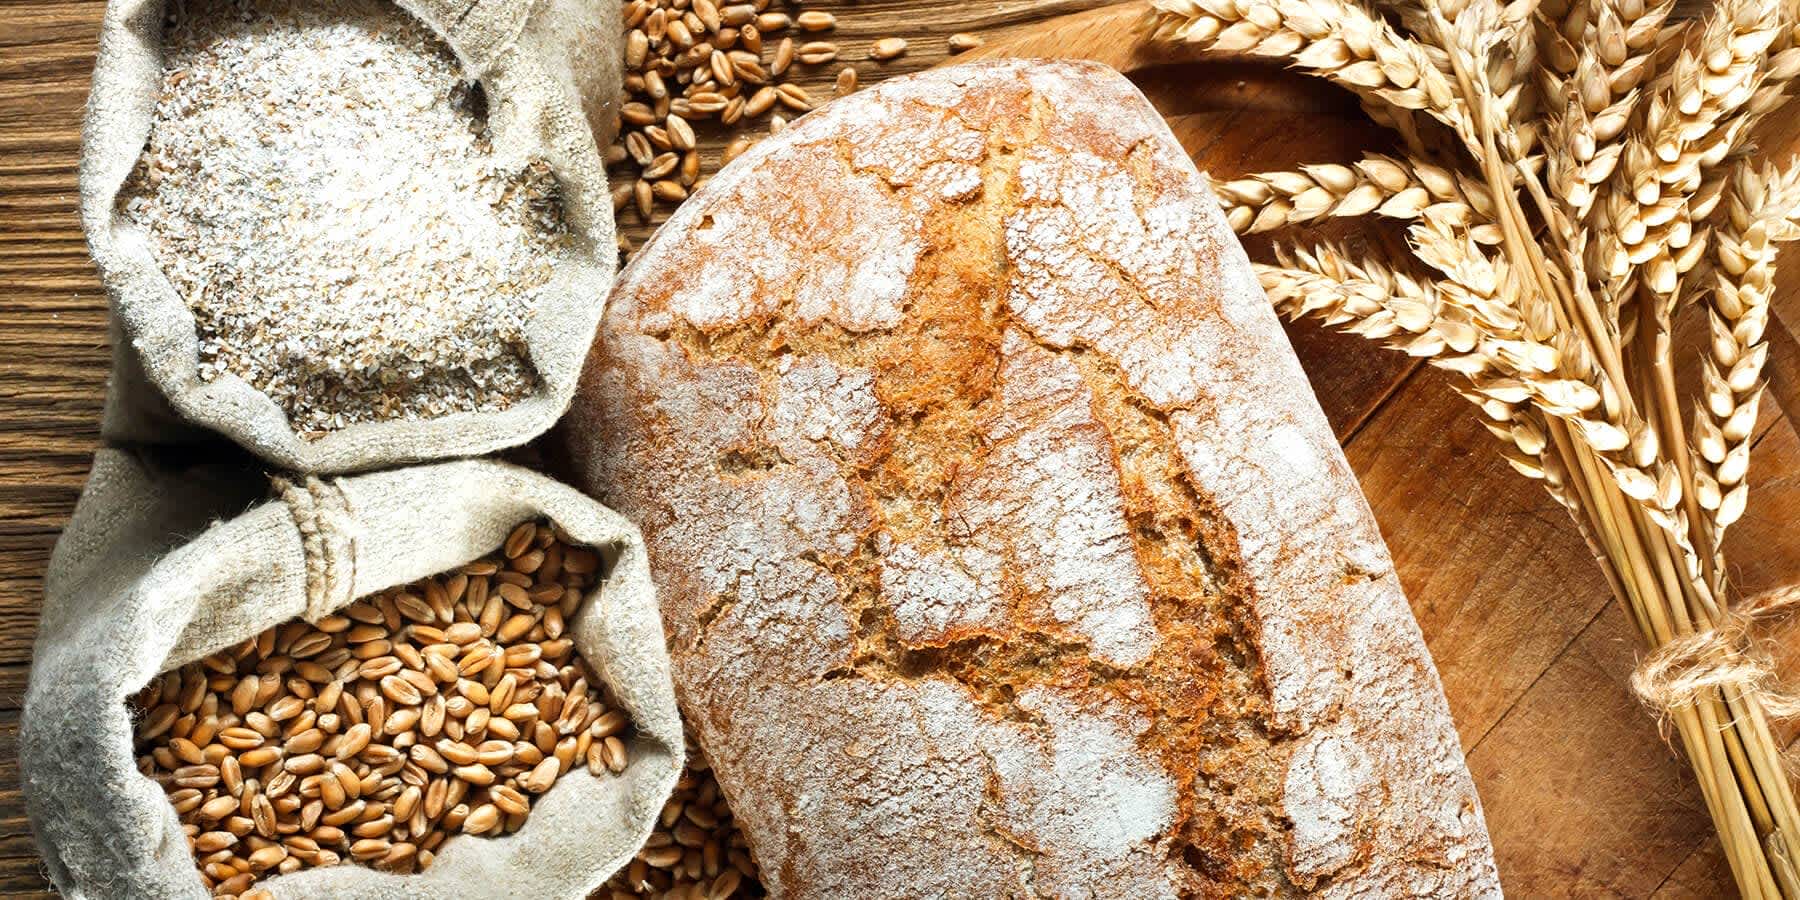 Table with gluten-containing bread products that may cause inflammation